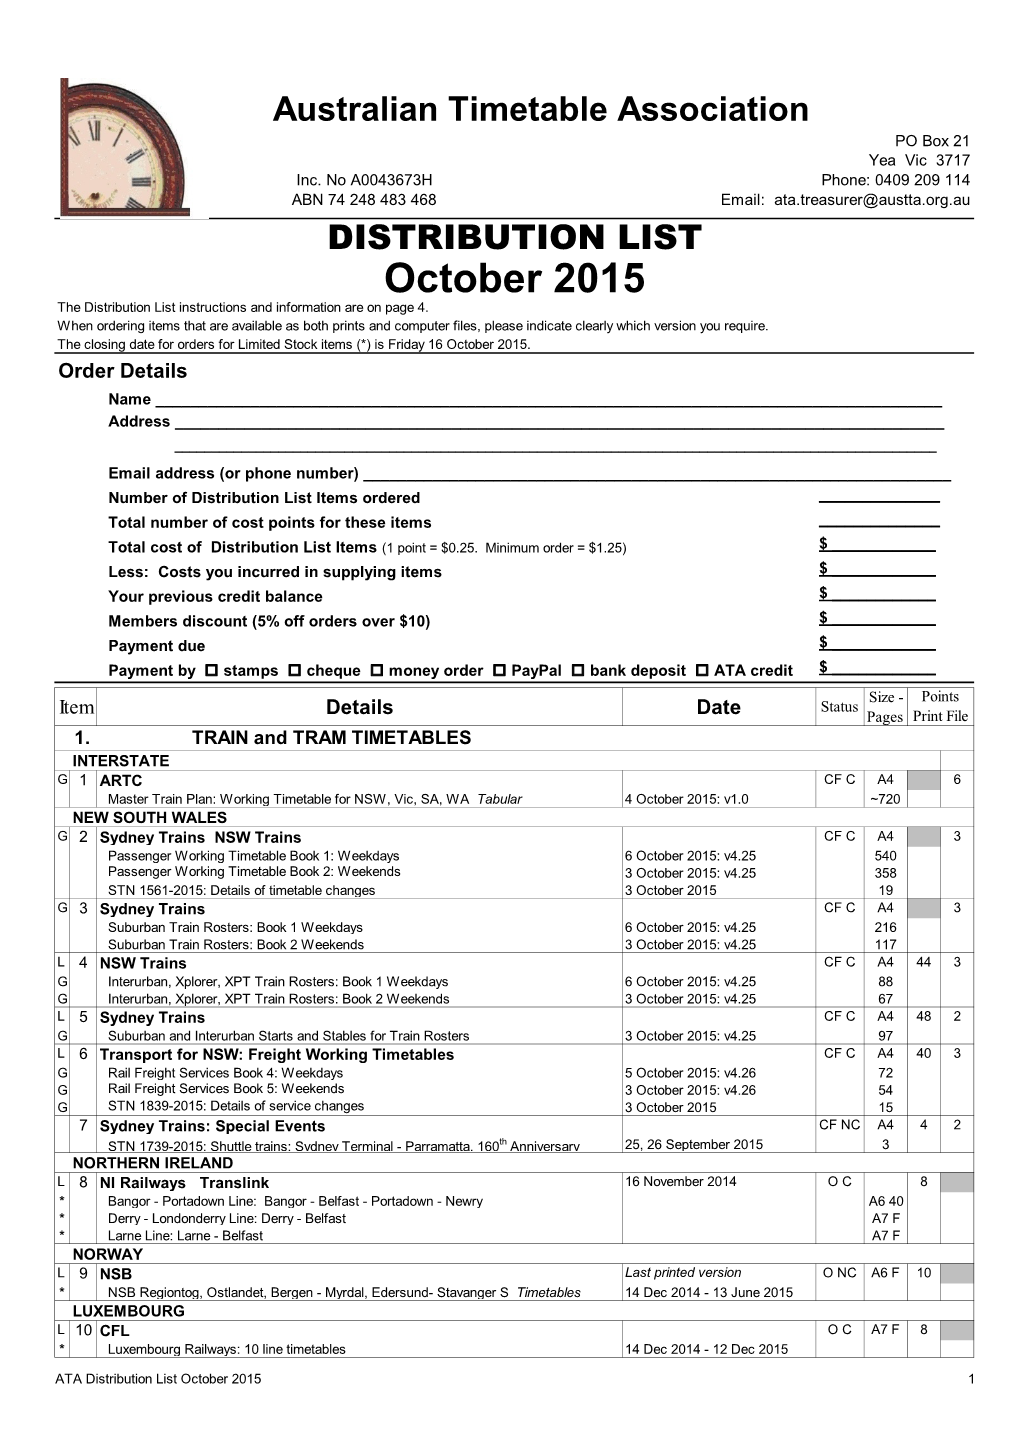 October 2015 the Distribution List Instructions and Information Are on Page 4